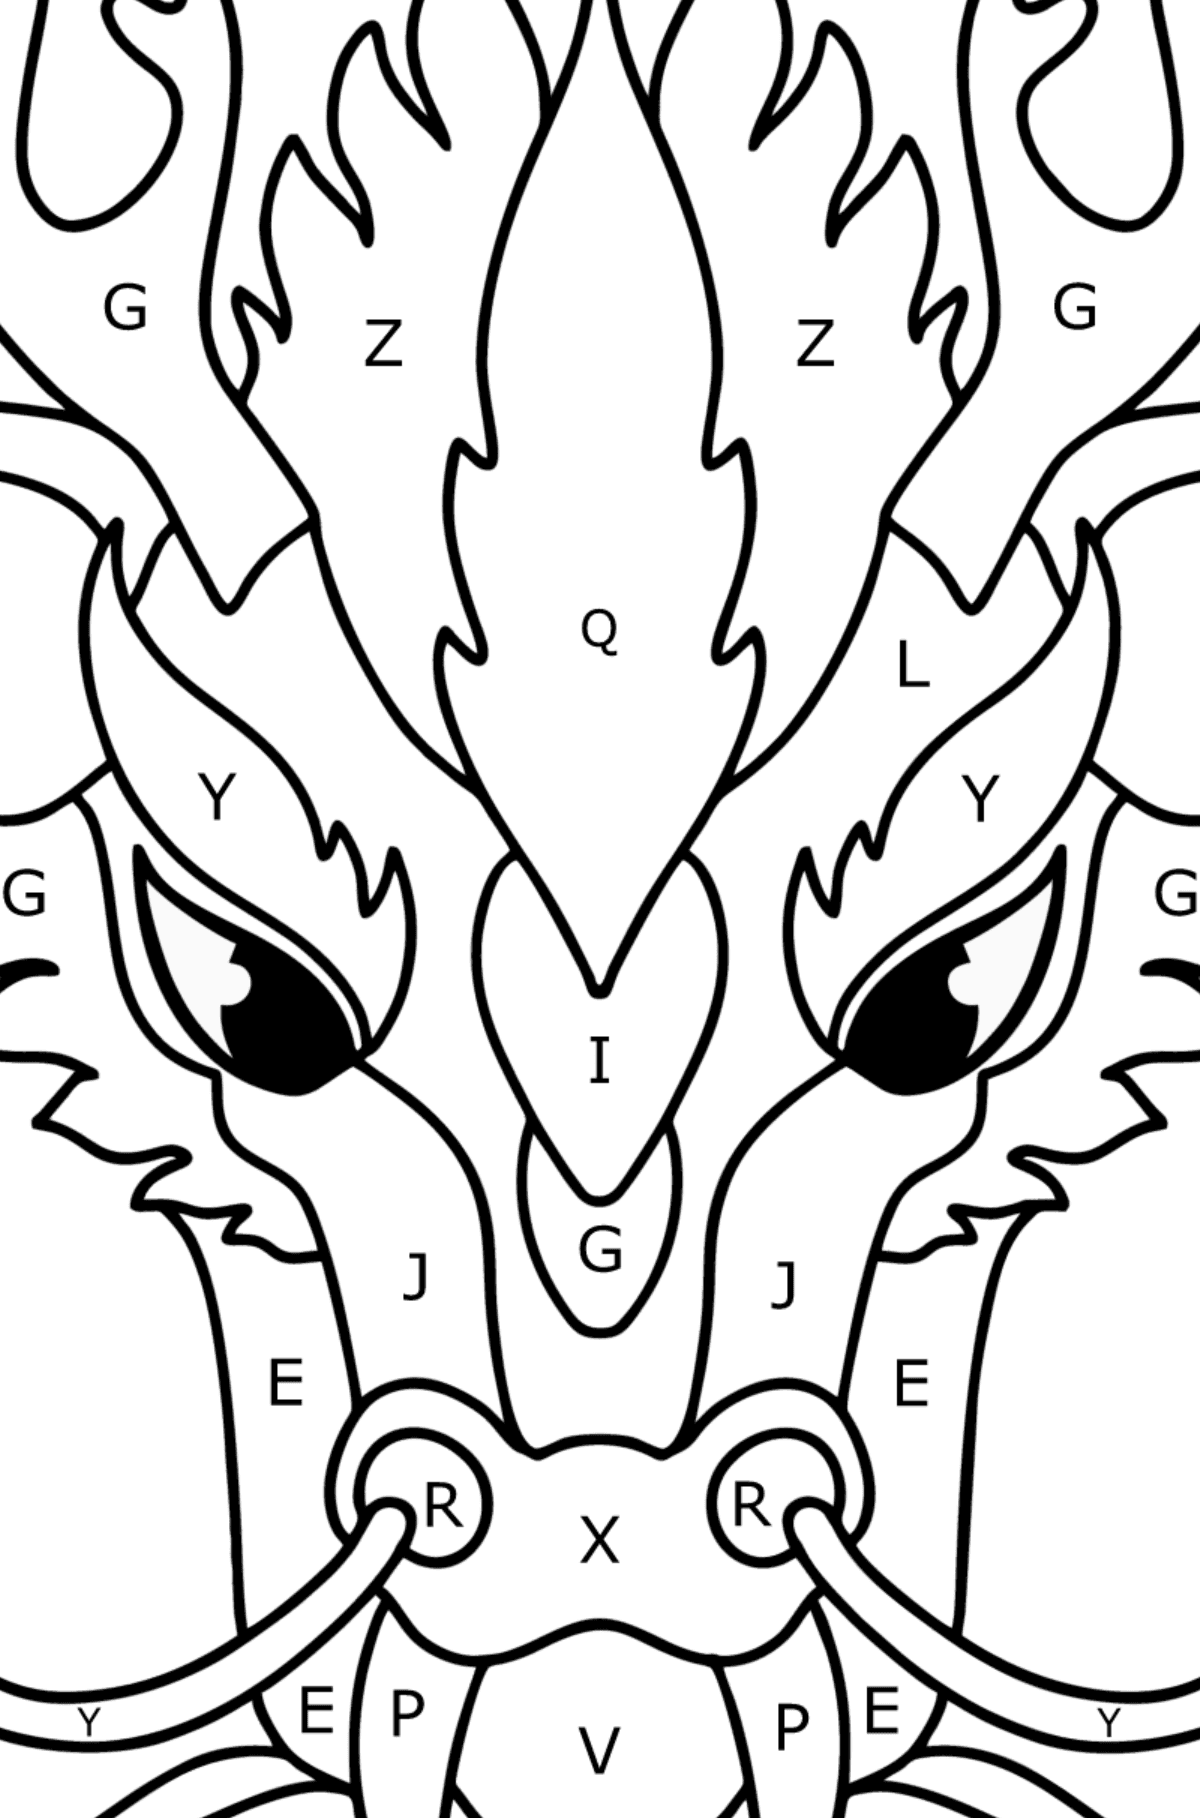 Dragon head coloring page - Coloring by Letters for Kids